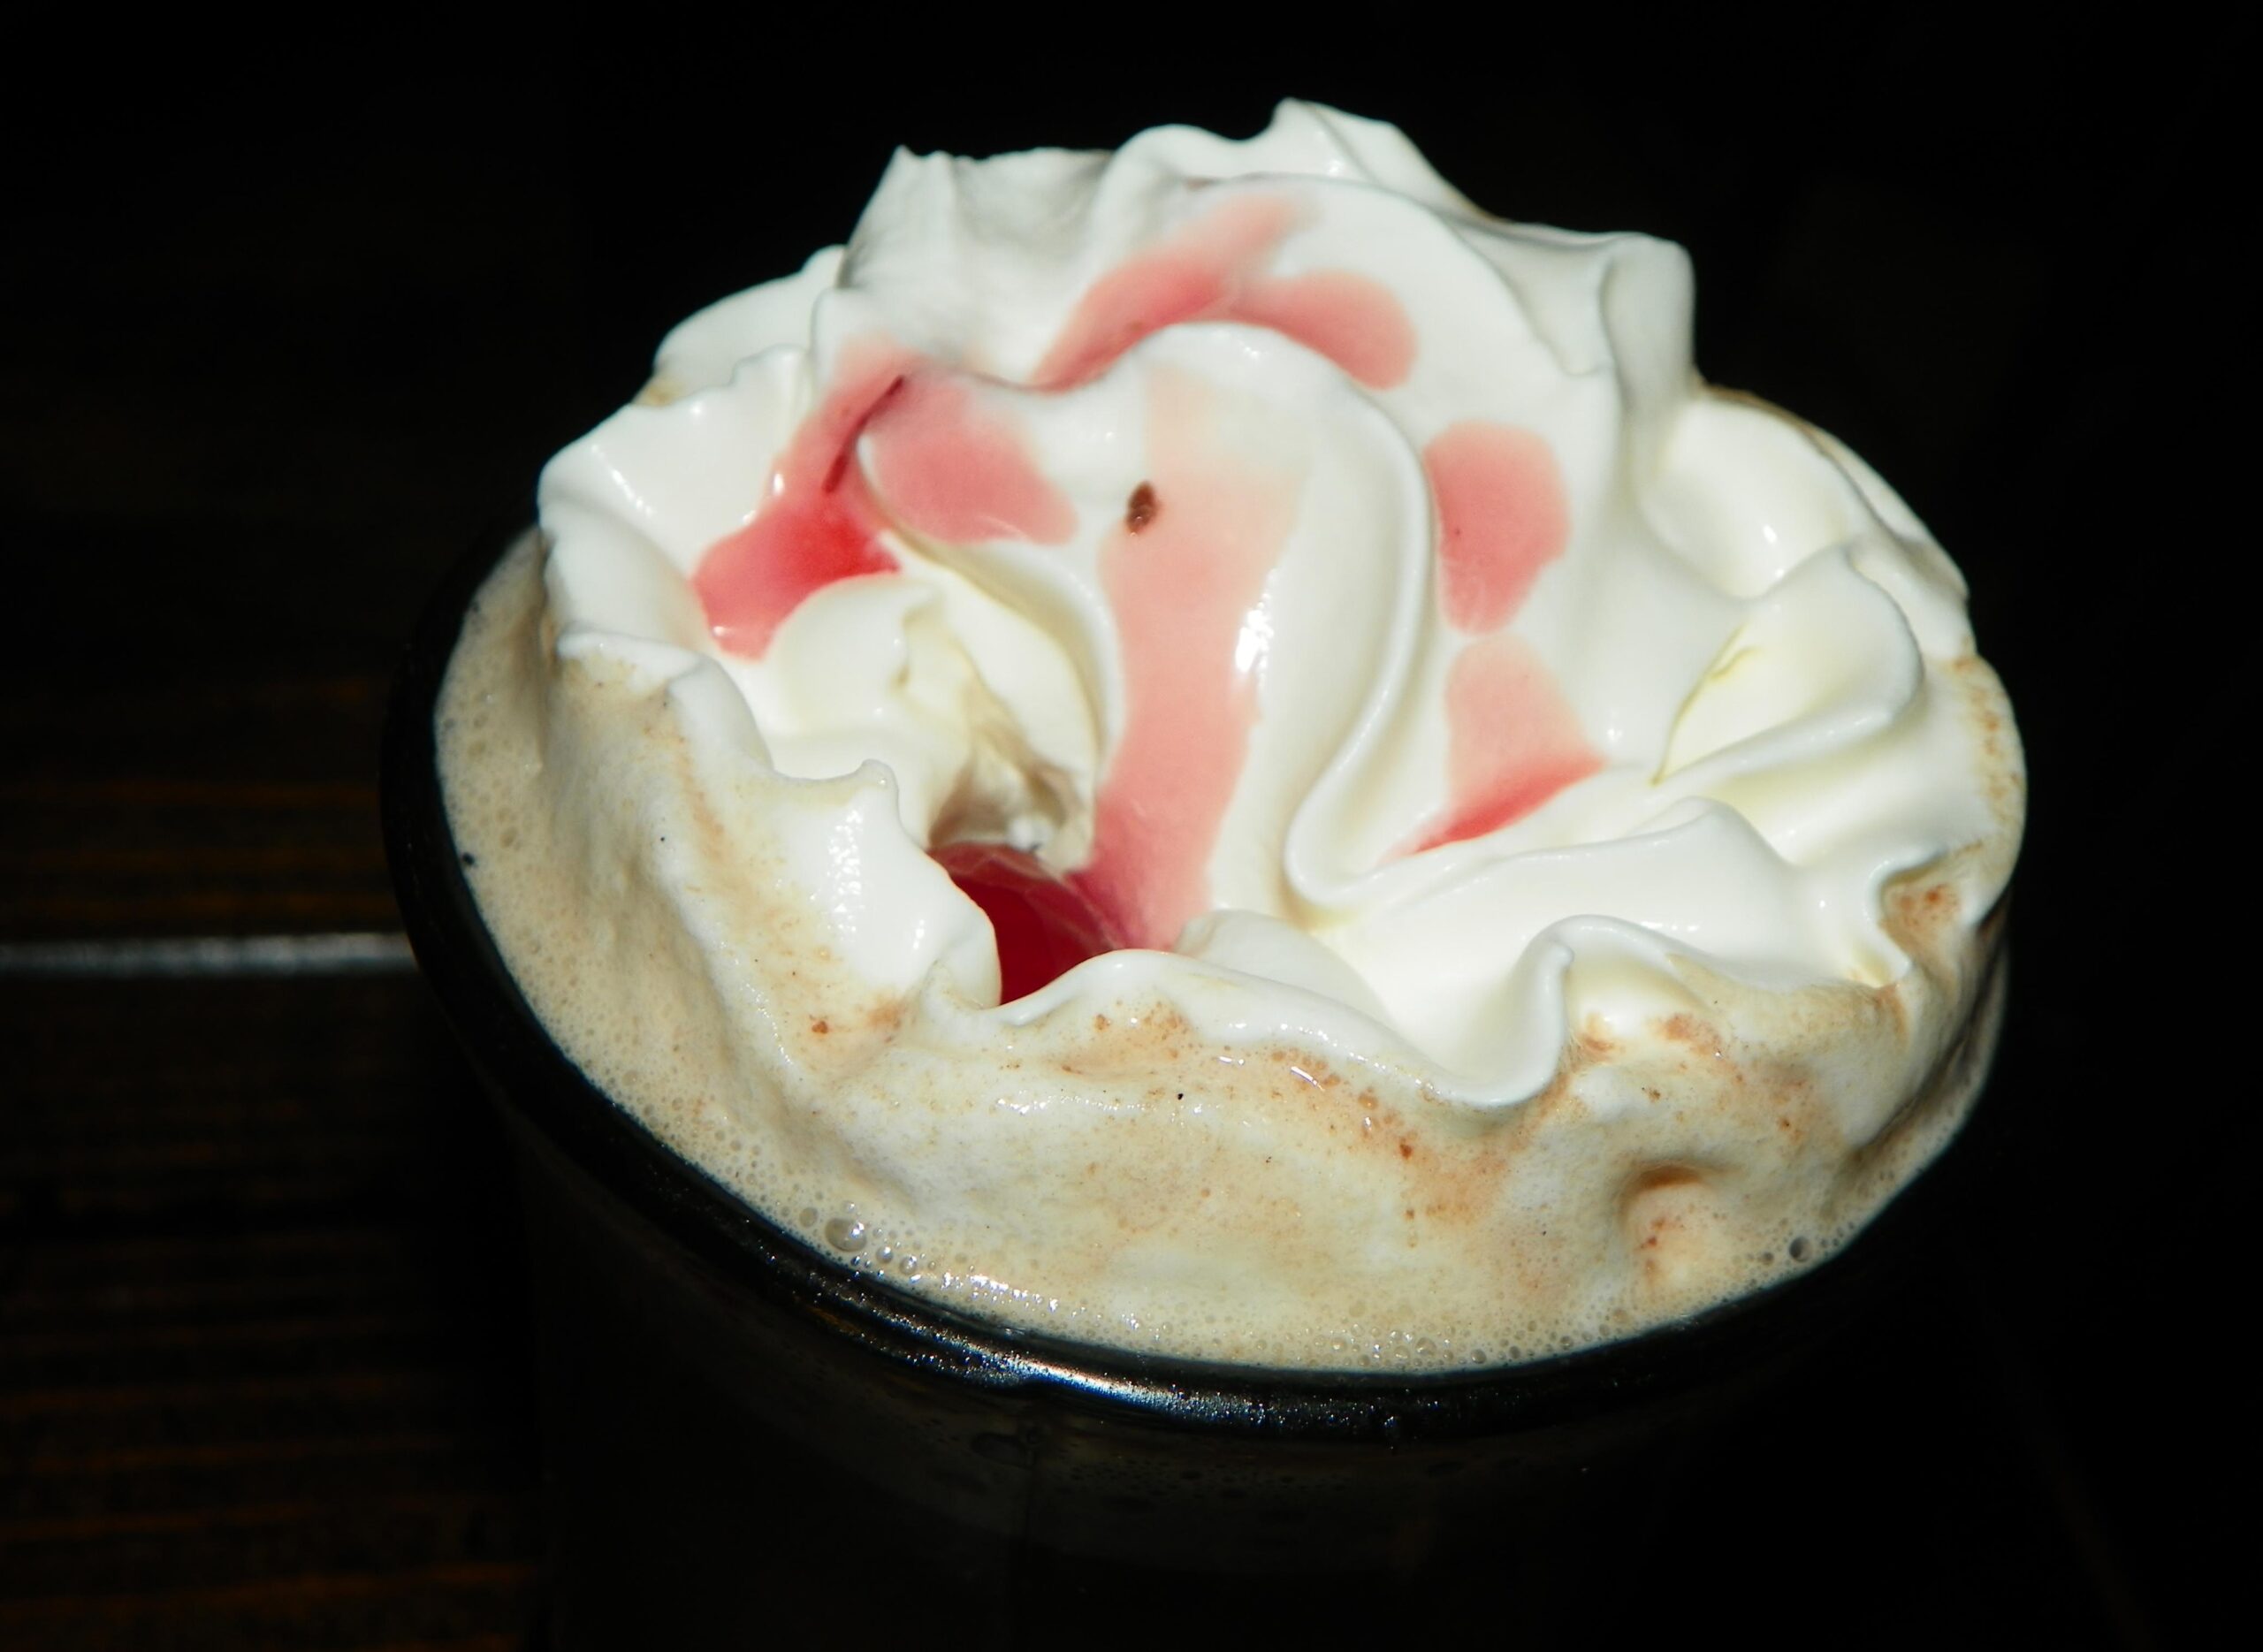  Get ready to bloom with this delicious Cherry Blossom Latte!